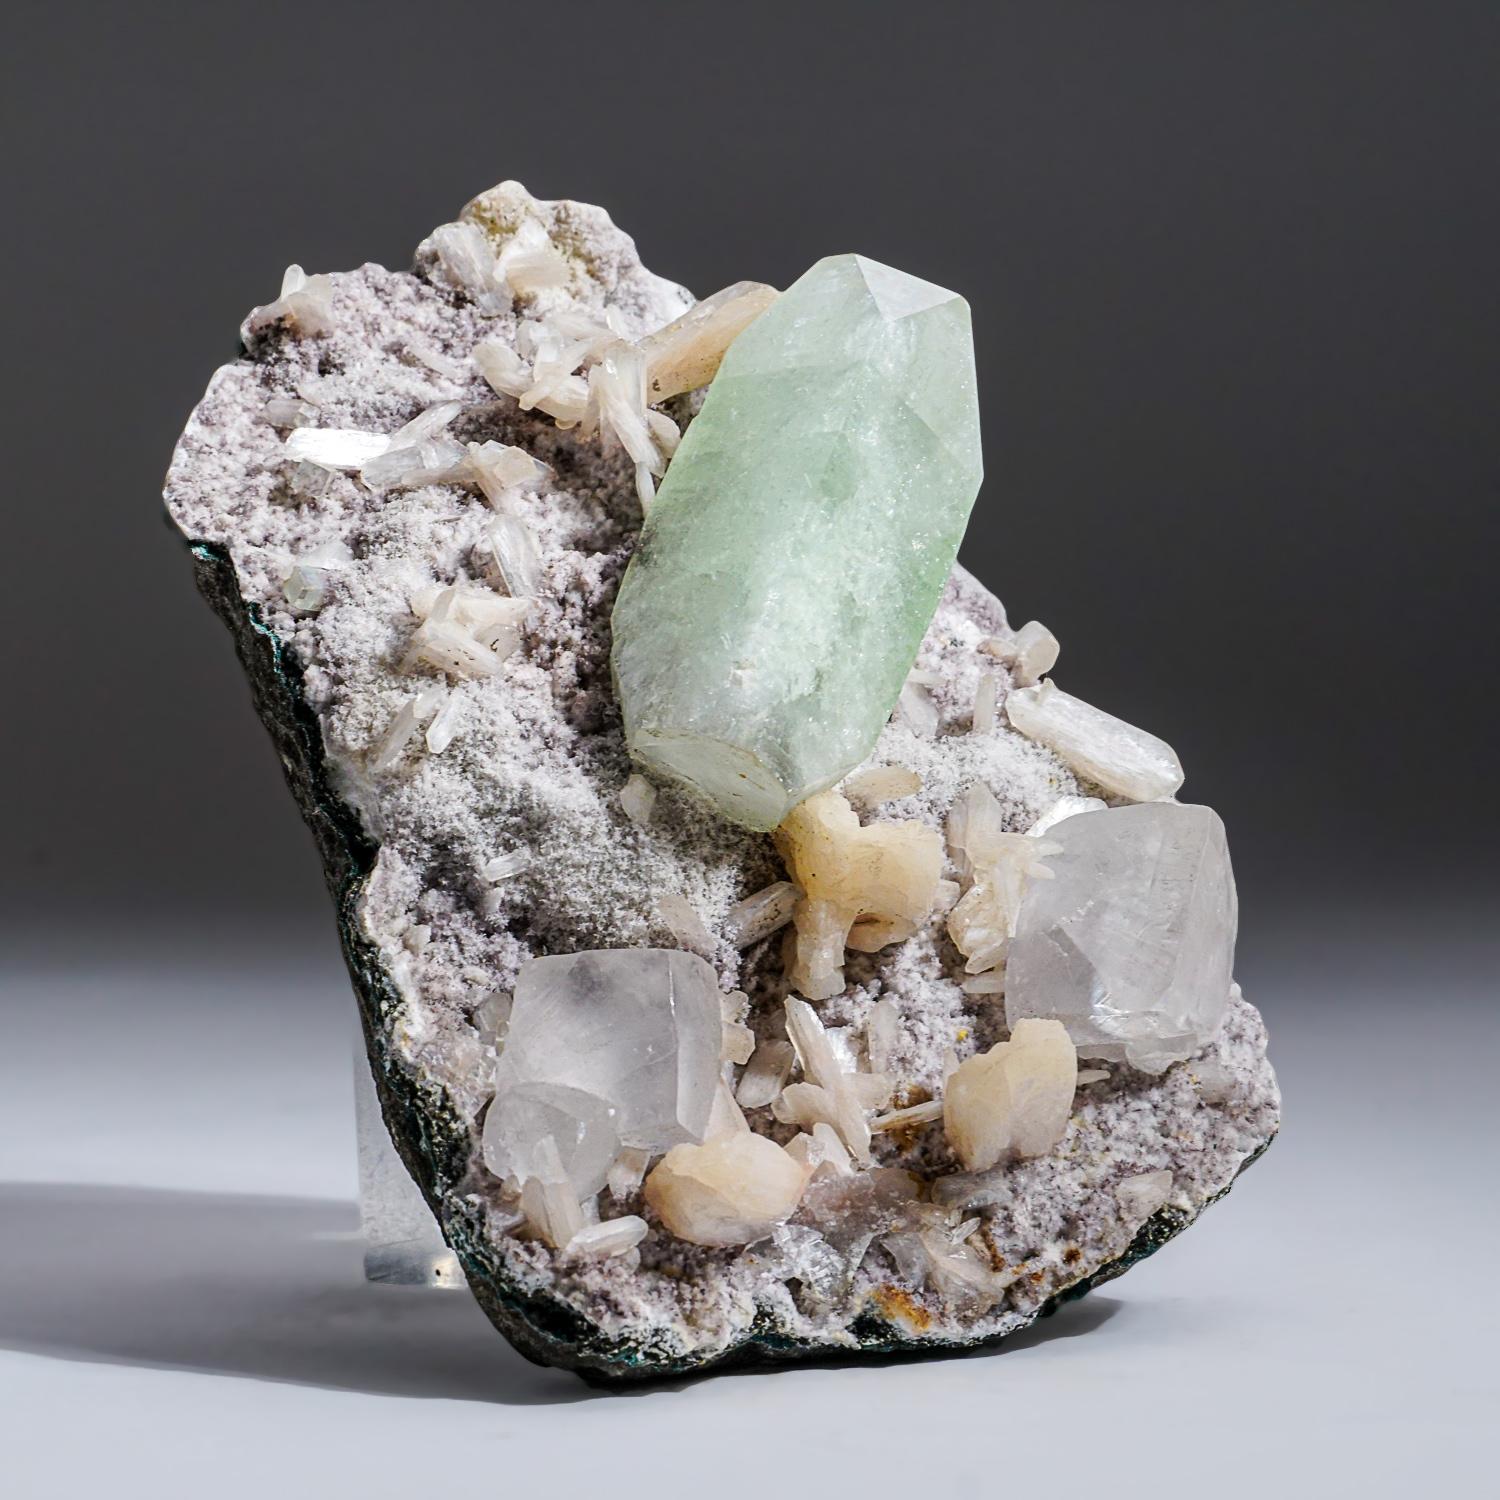 From Nasik District, Maharashtra, India Large translucent to transparent apophyllite crystal cluster with twinned crystals of calcite on matrix with bladed translucent pale-pink stilbite crystals. The apophylite has rich gemmy green color This